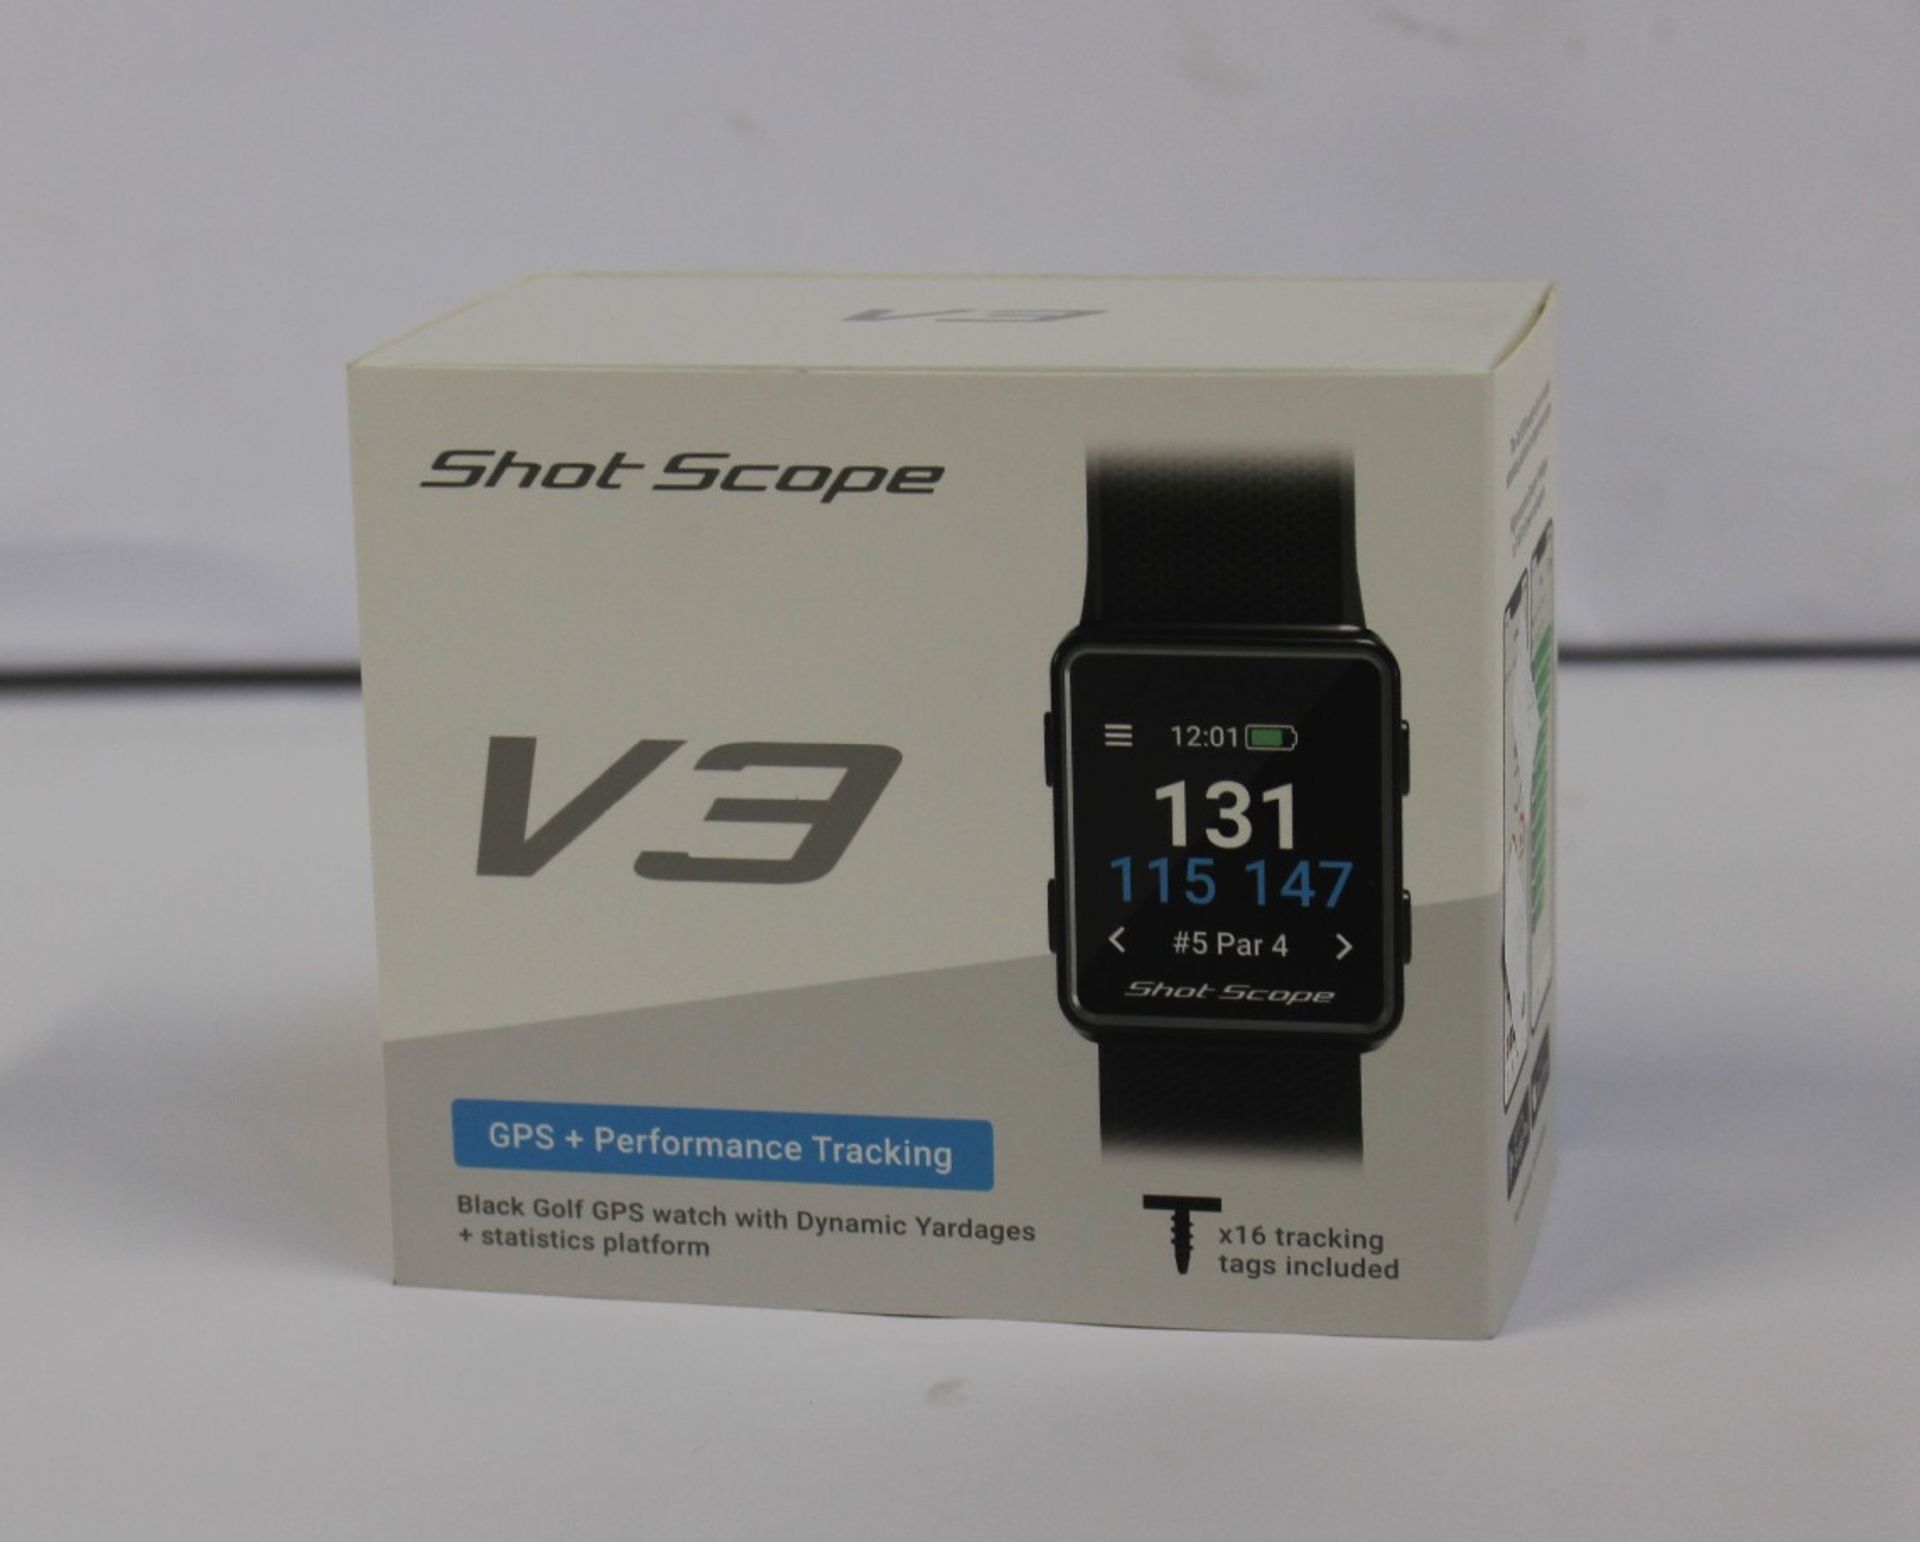 A boxed as new Shot Scope V3 Black Golf GPS + Performance tracking watch with 16 tracking tags